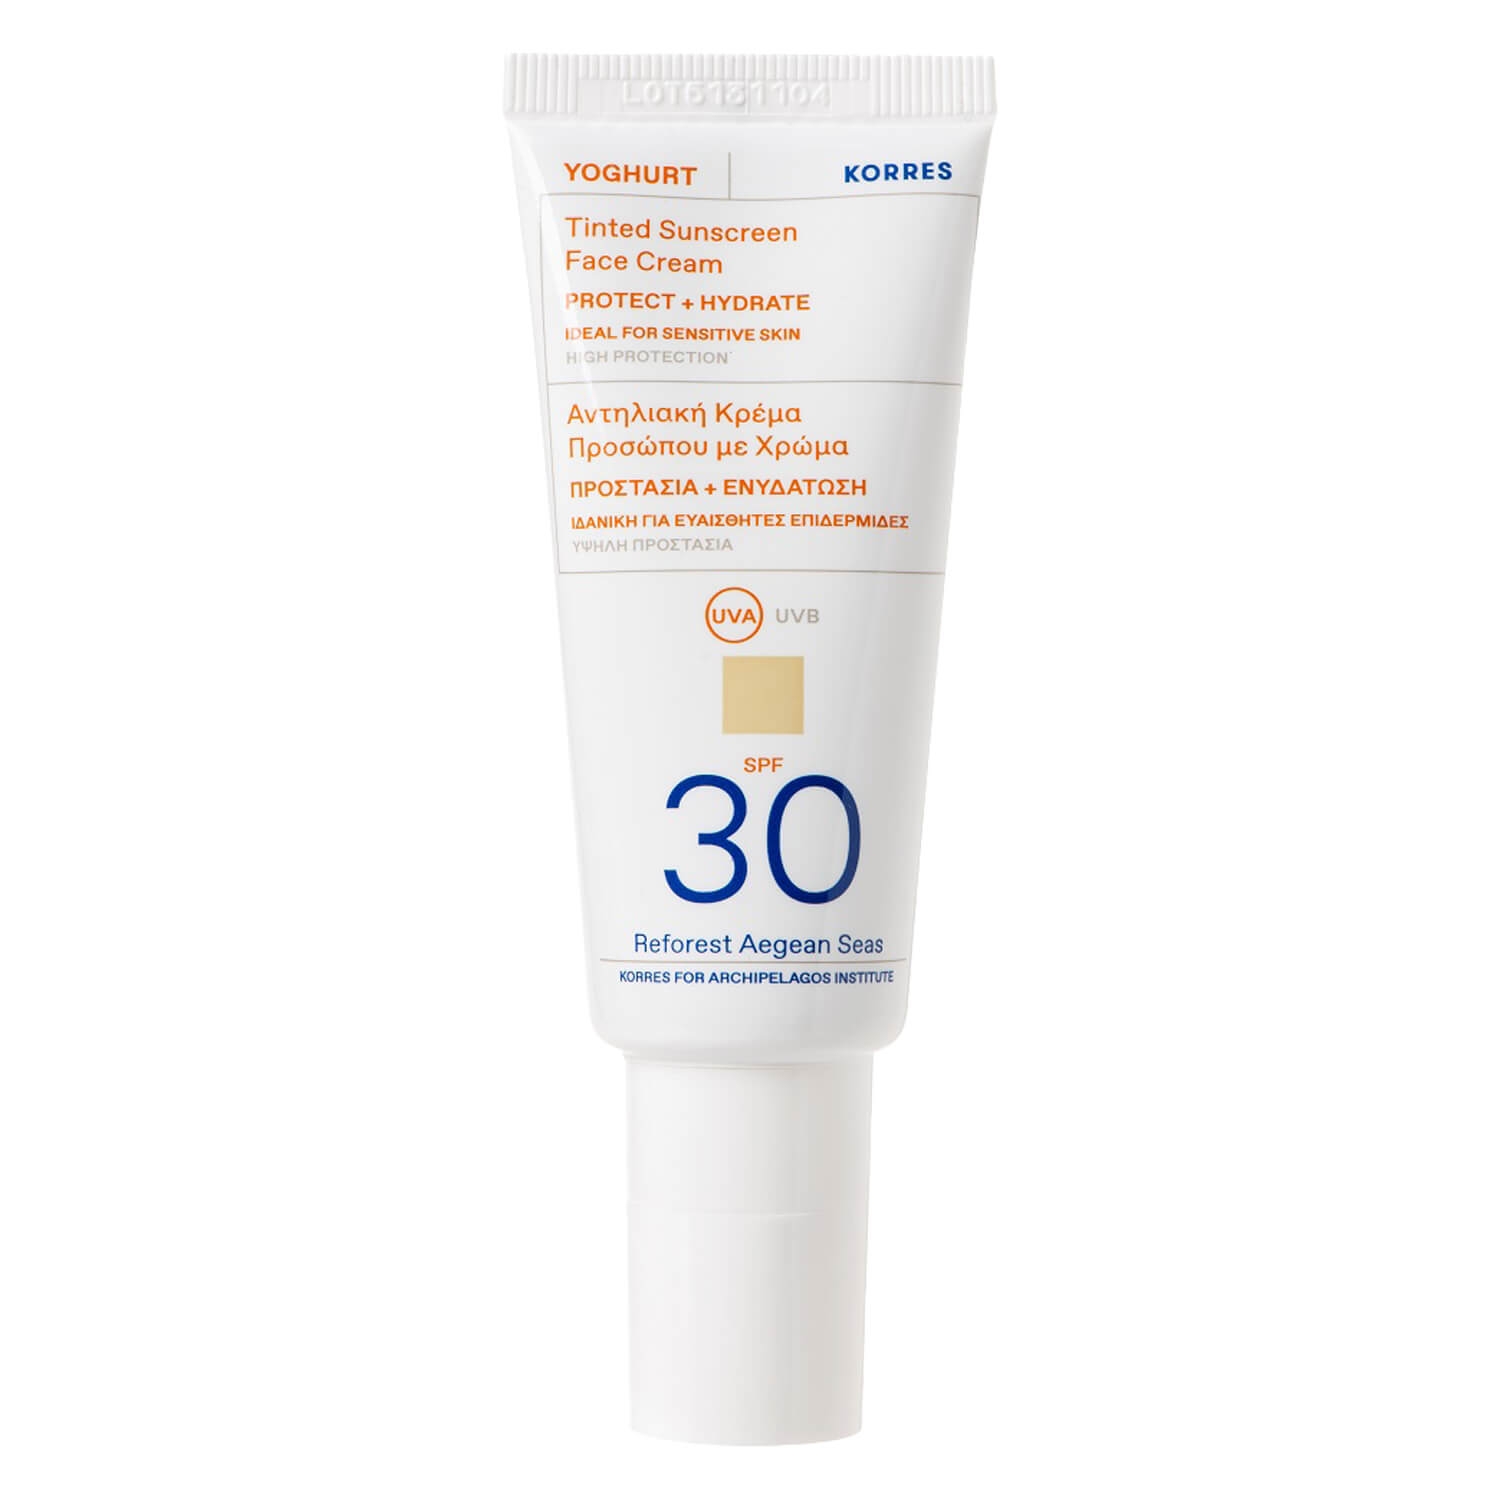 Product image from Korres Care - Yoghurt Tinted Sunscreen Face Cream SPF30